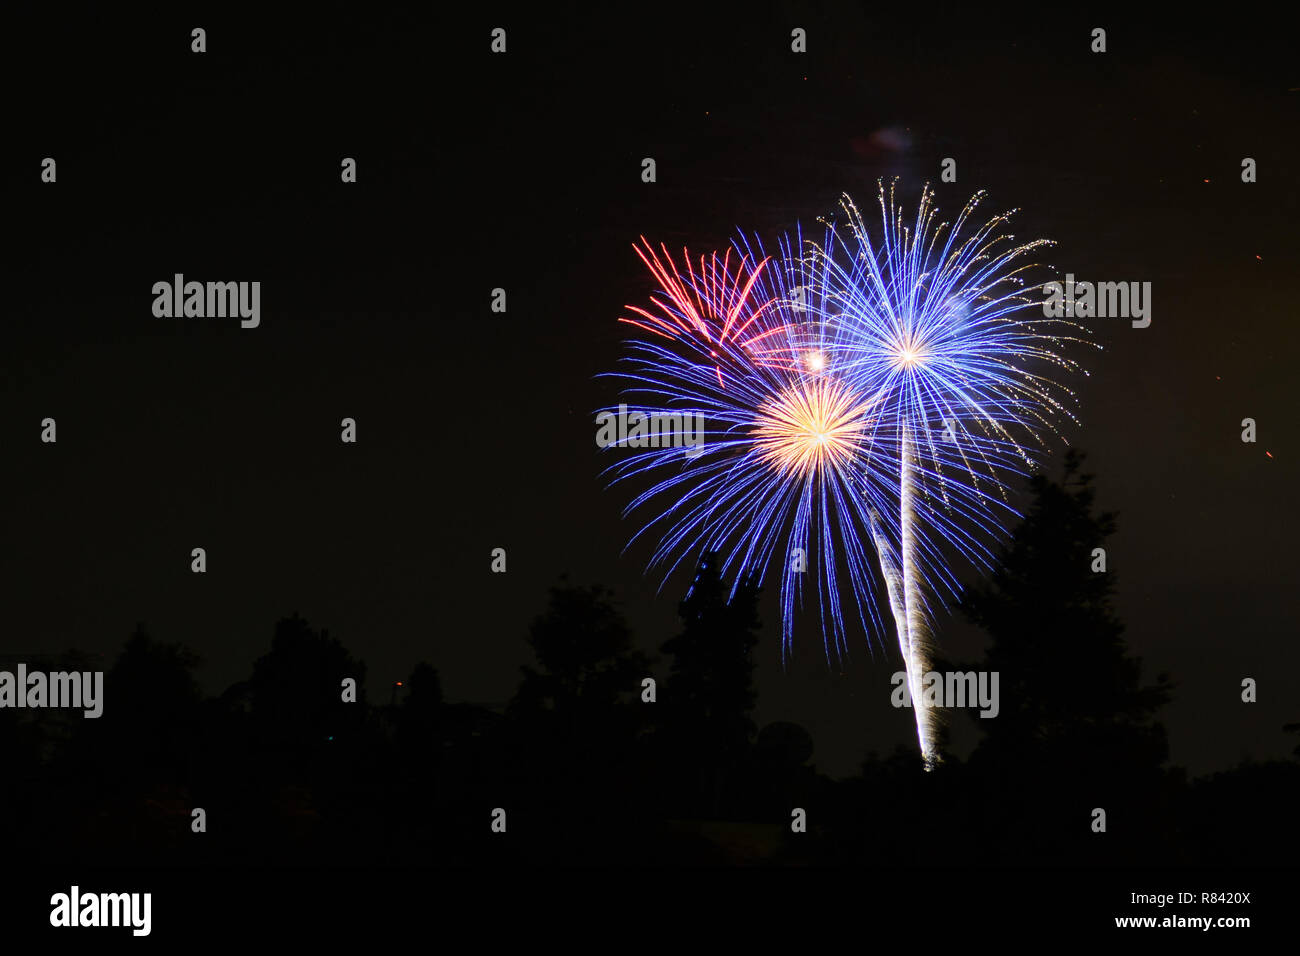 Colorful fireworks display on a dark sky background; Celebrations, Festivals, Independence Day, 4th of July or New Year Stock Photo